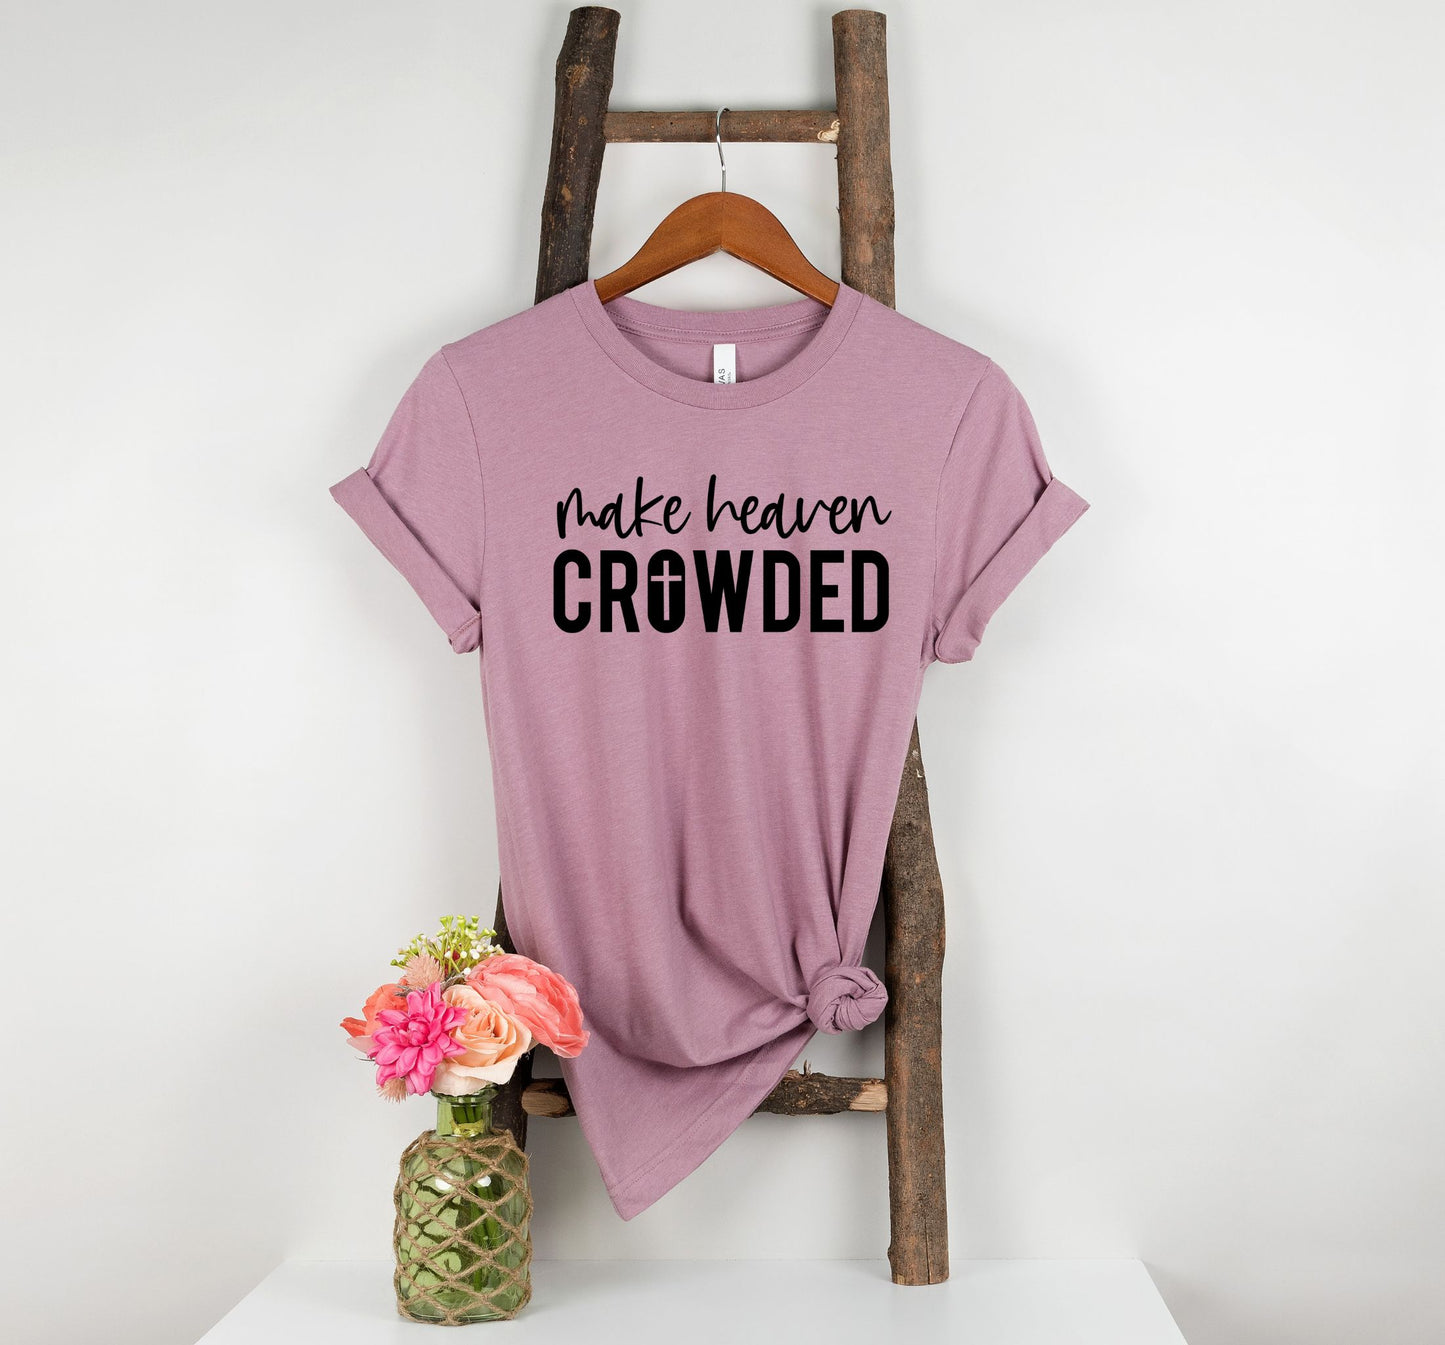 Bella Canvas 3001 t-shirt with "Make Heaven Crowded" design